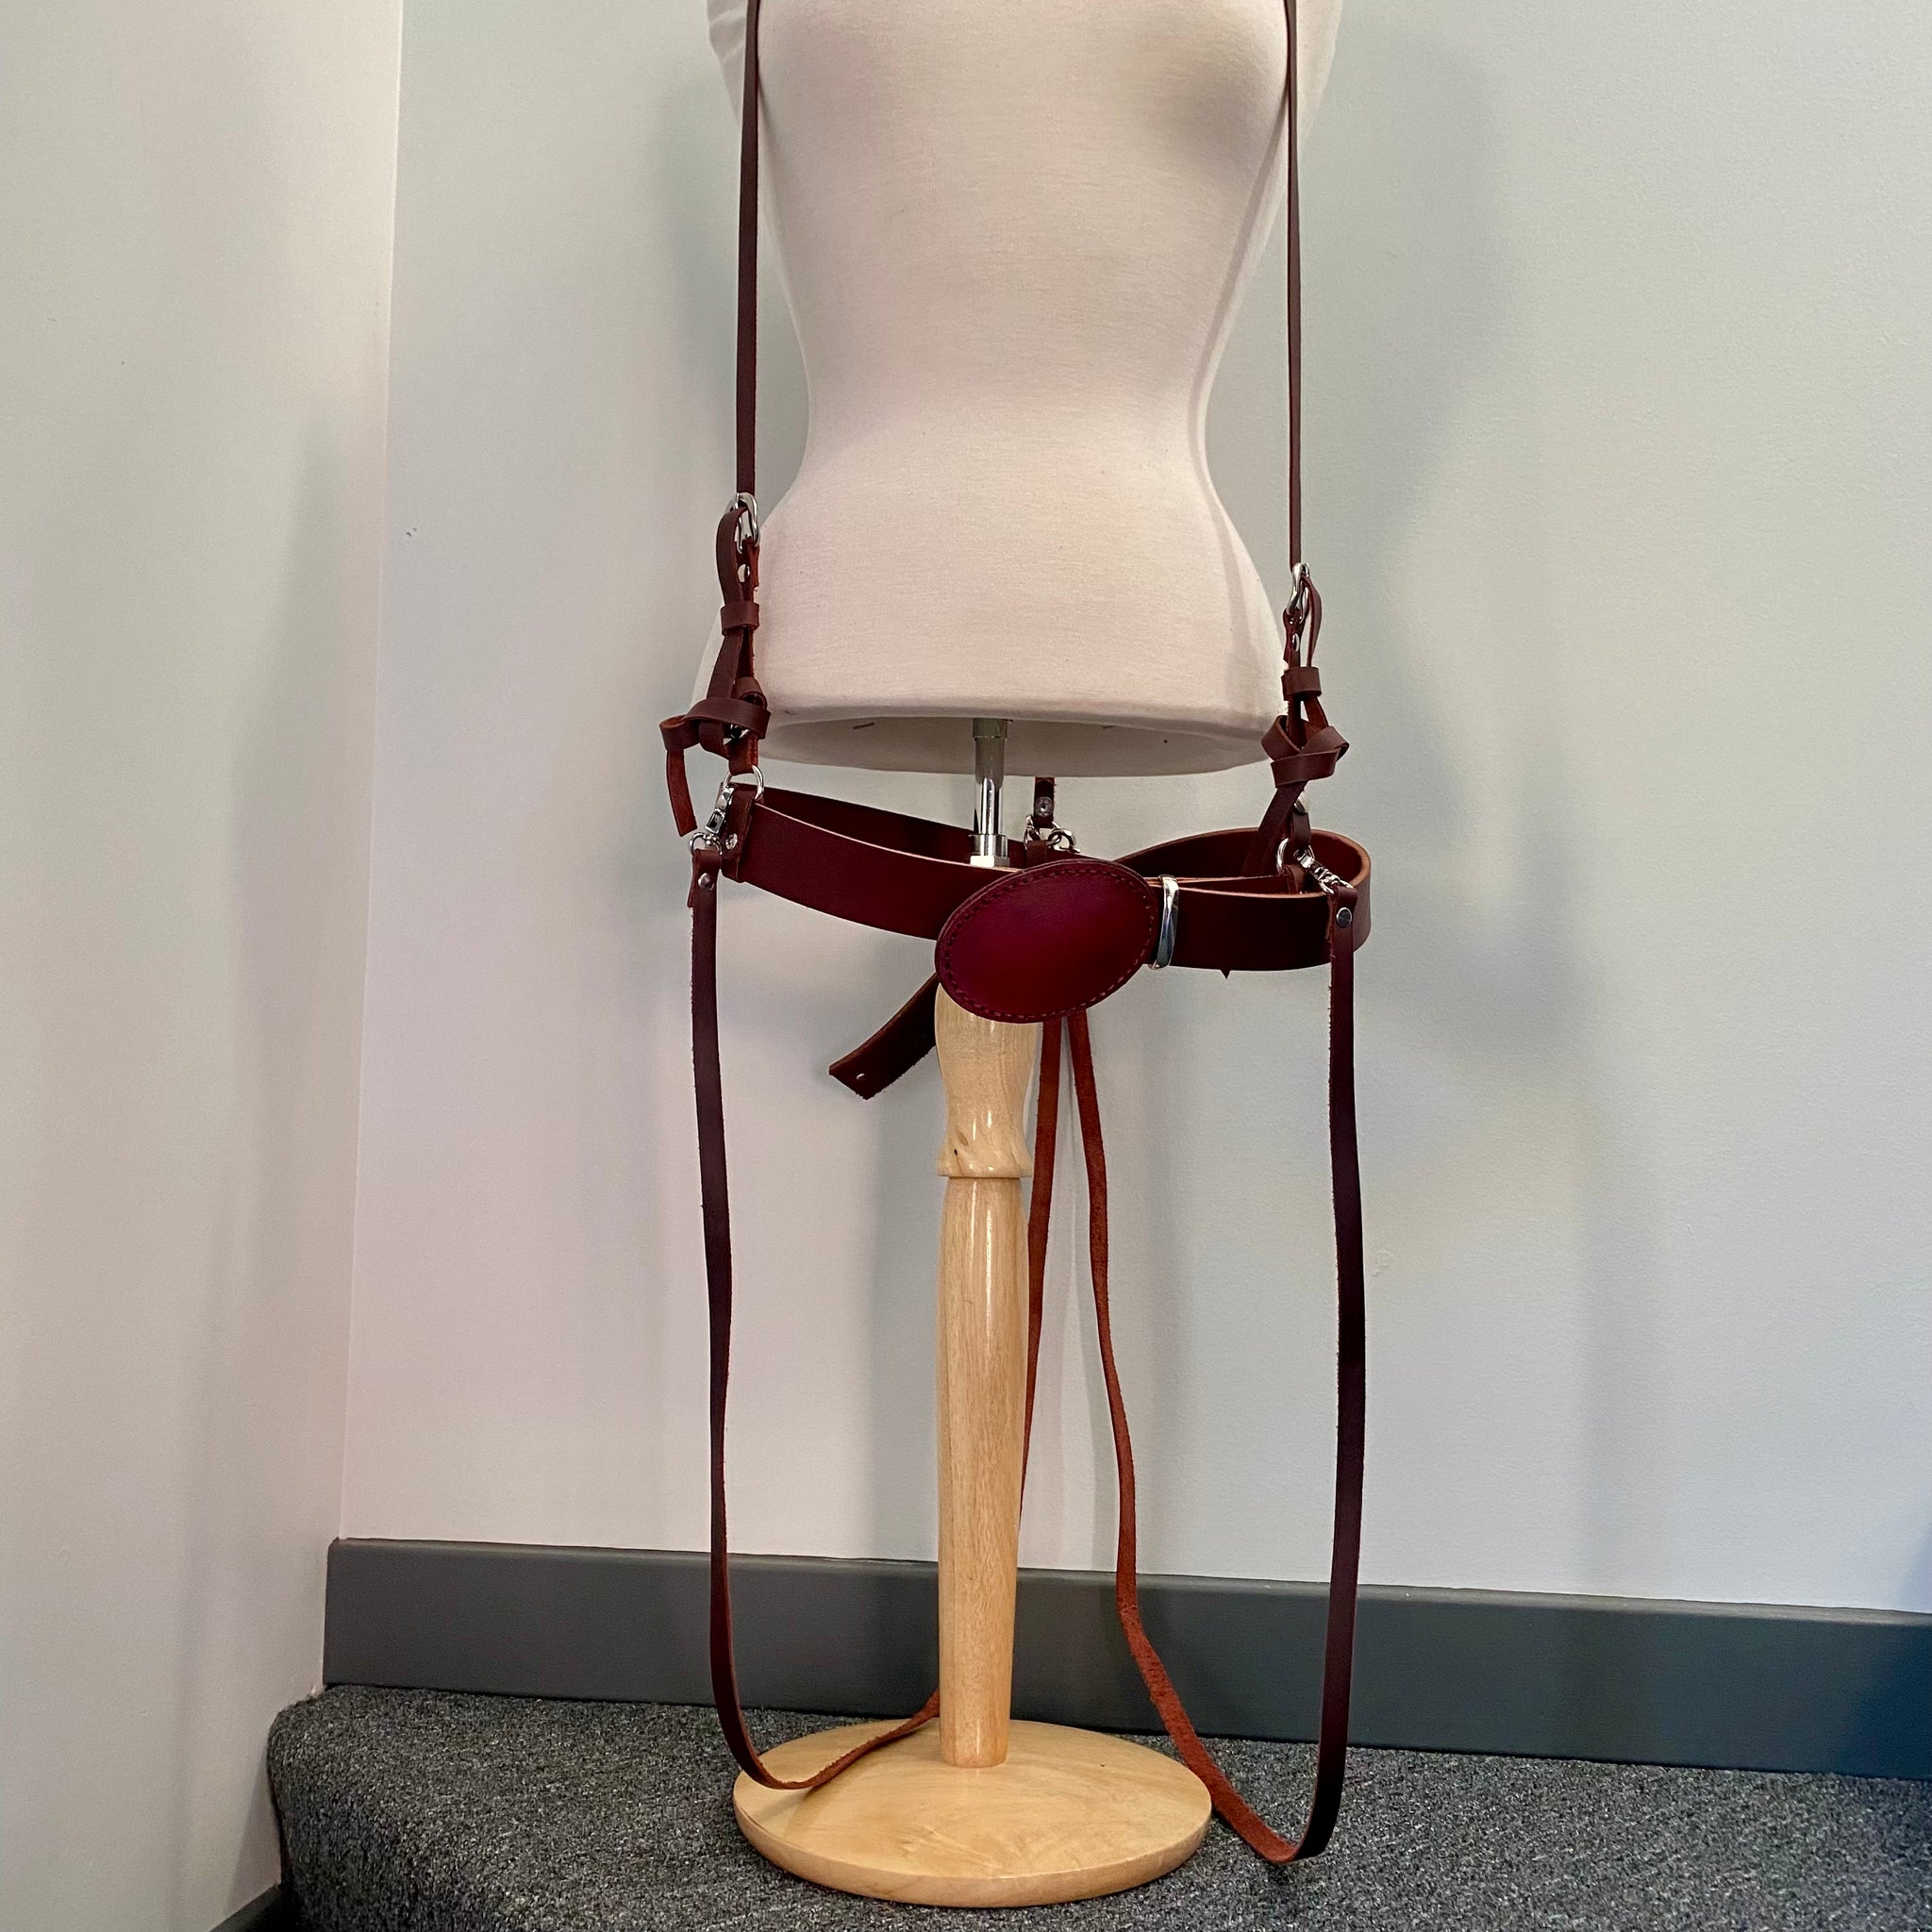 LEATHER BELT WITH DETACHABLE SUSPENDERS AND DANGLING STRAPS. by nyet jewelry